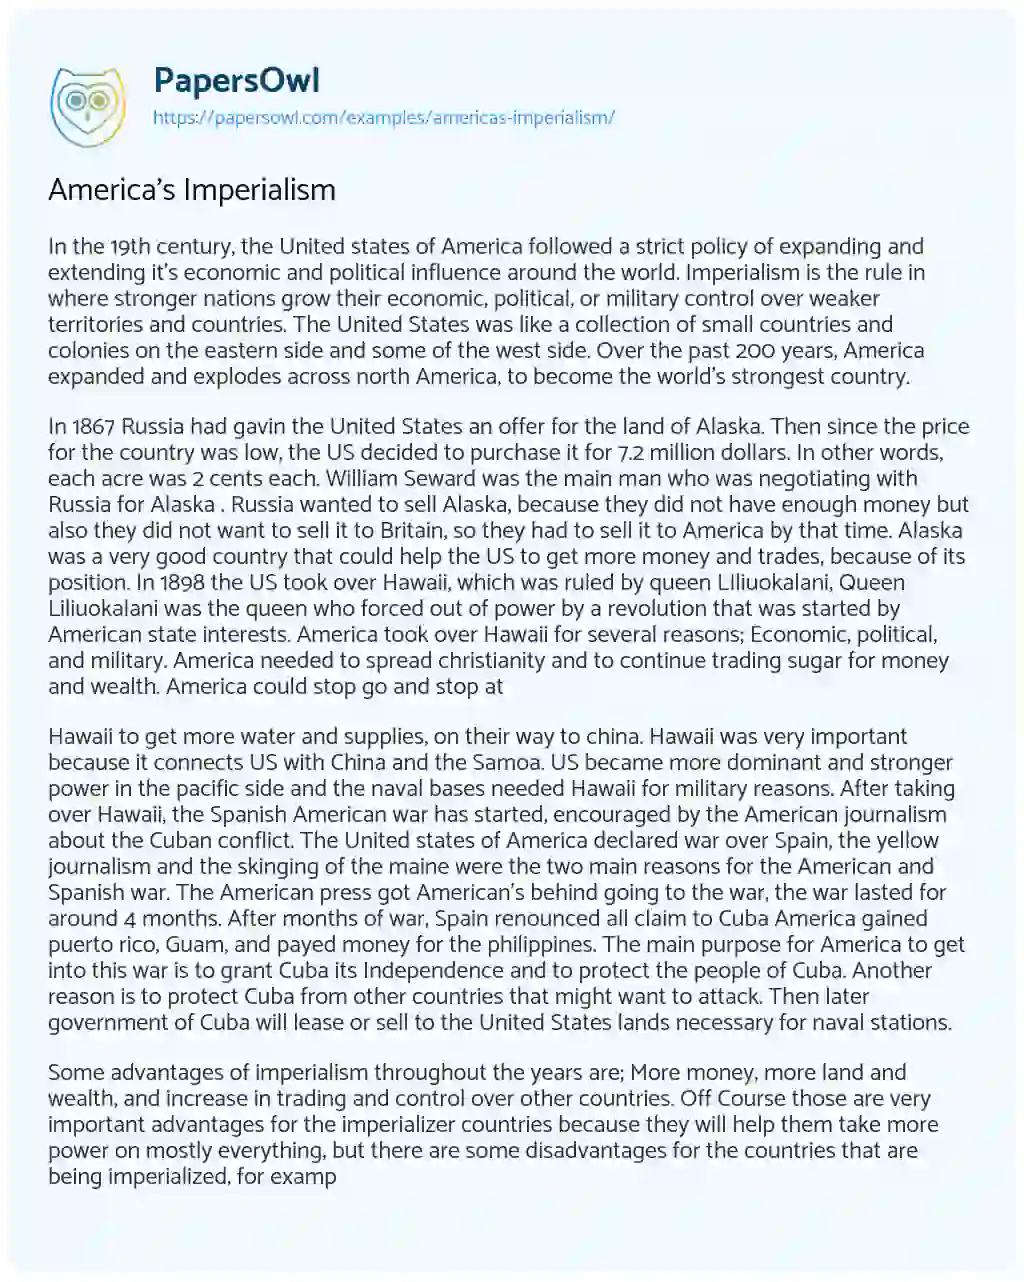 Essay on America’s Imperialism